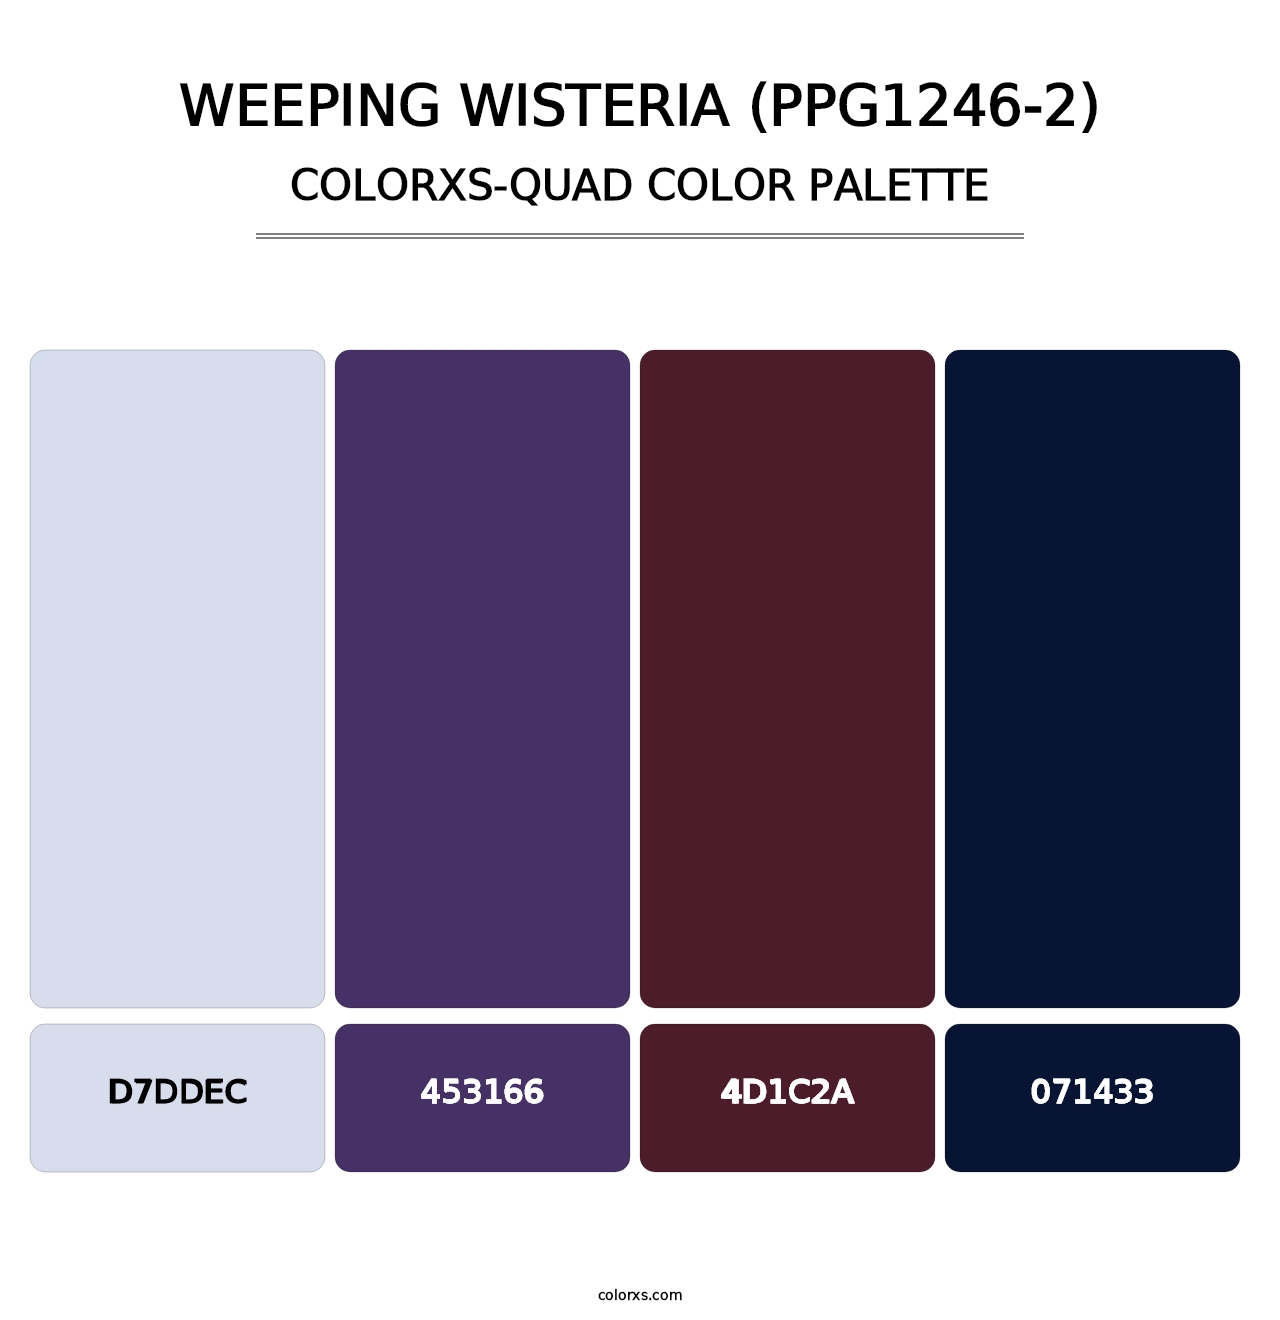 Weeping Wisteria (PPG1246-2) - Colorxs Quad Palette